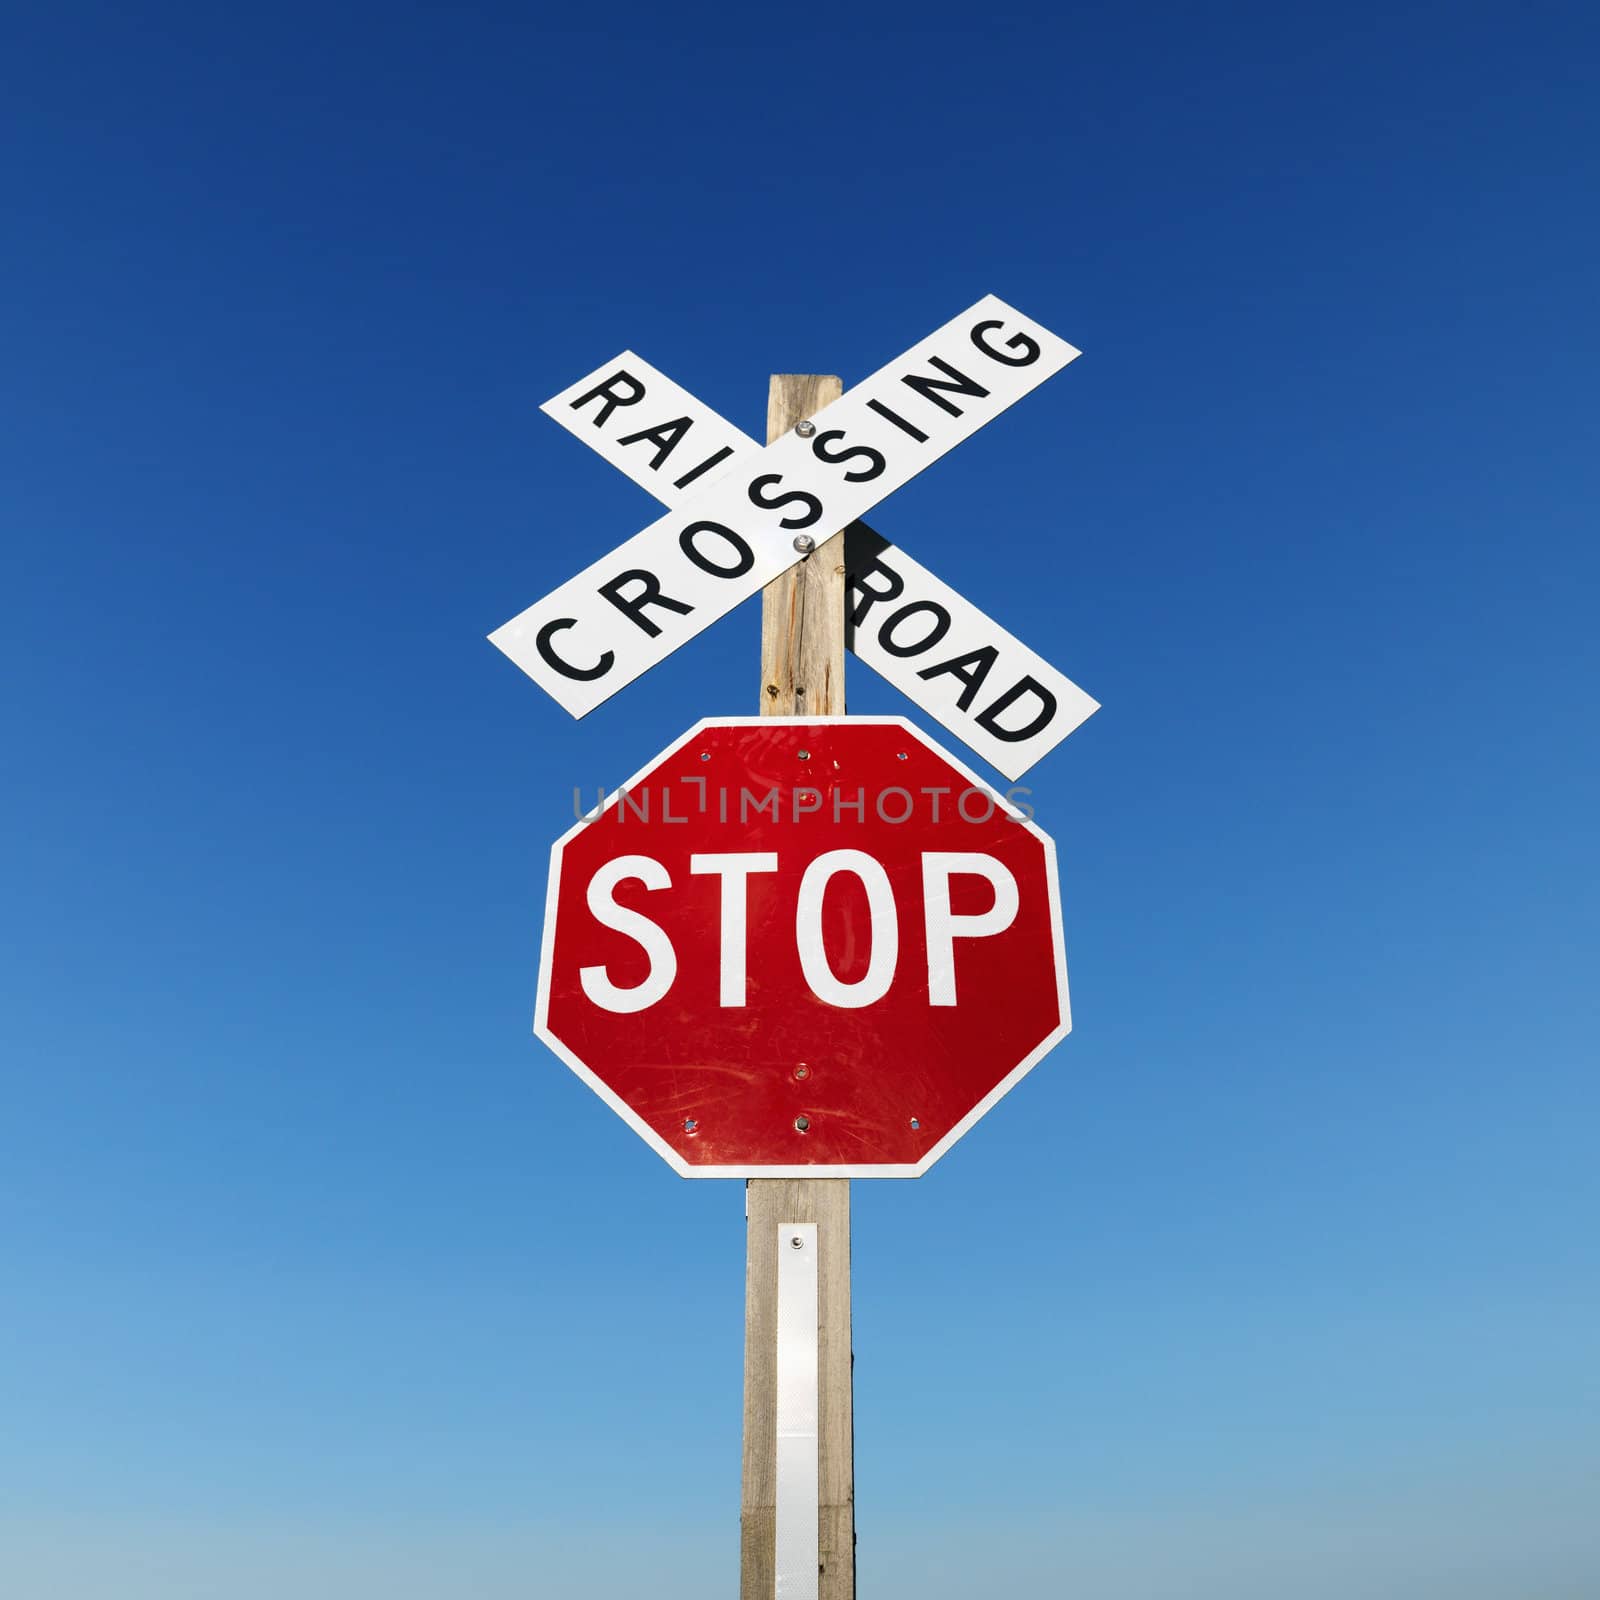 Railroad crossing and stop signs against blue sky.